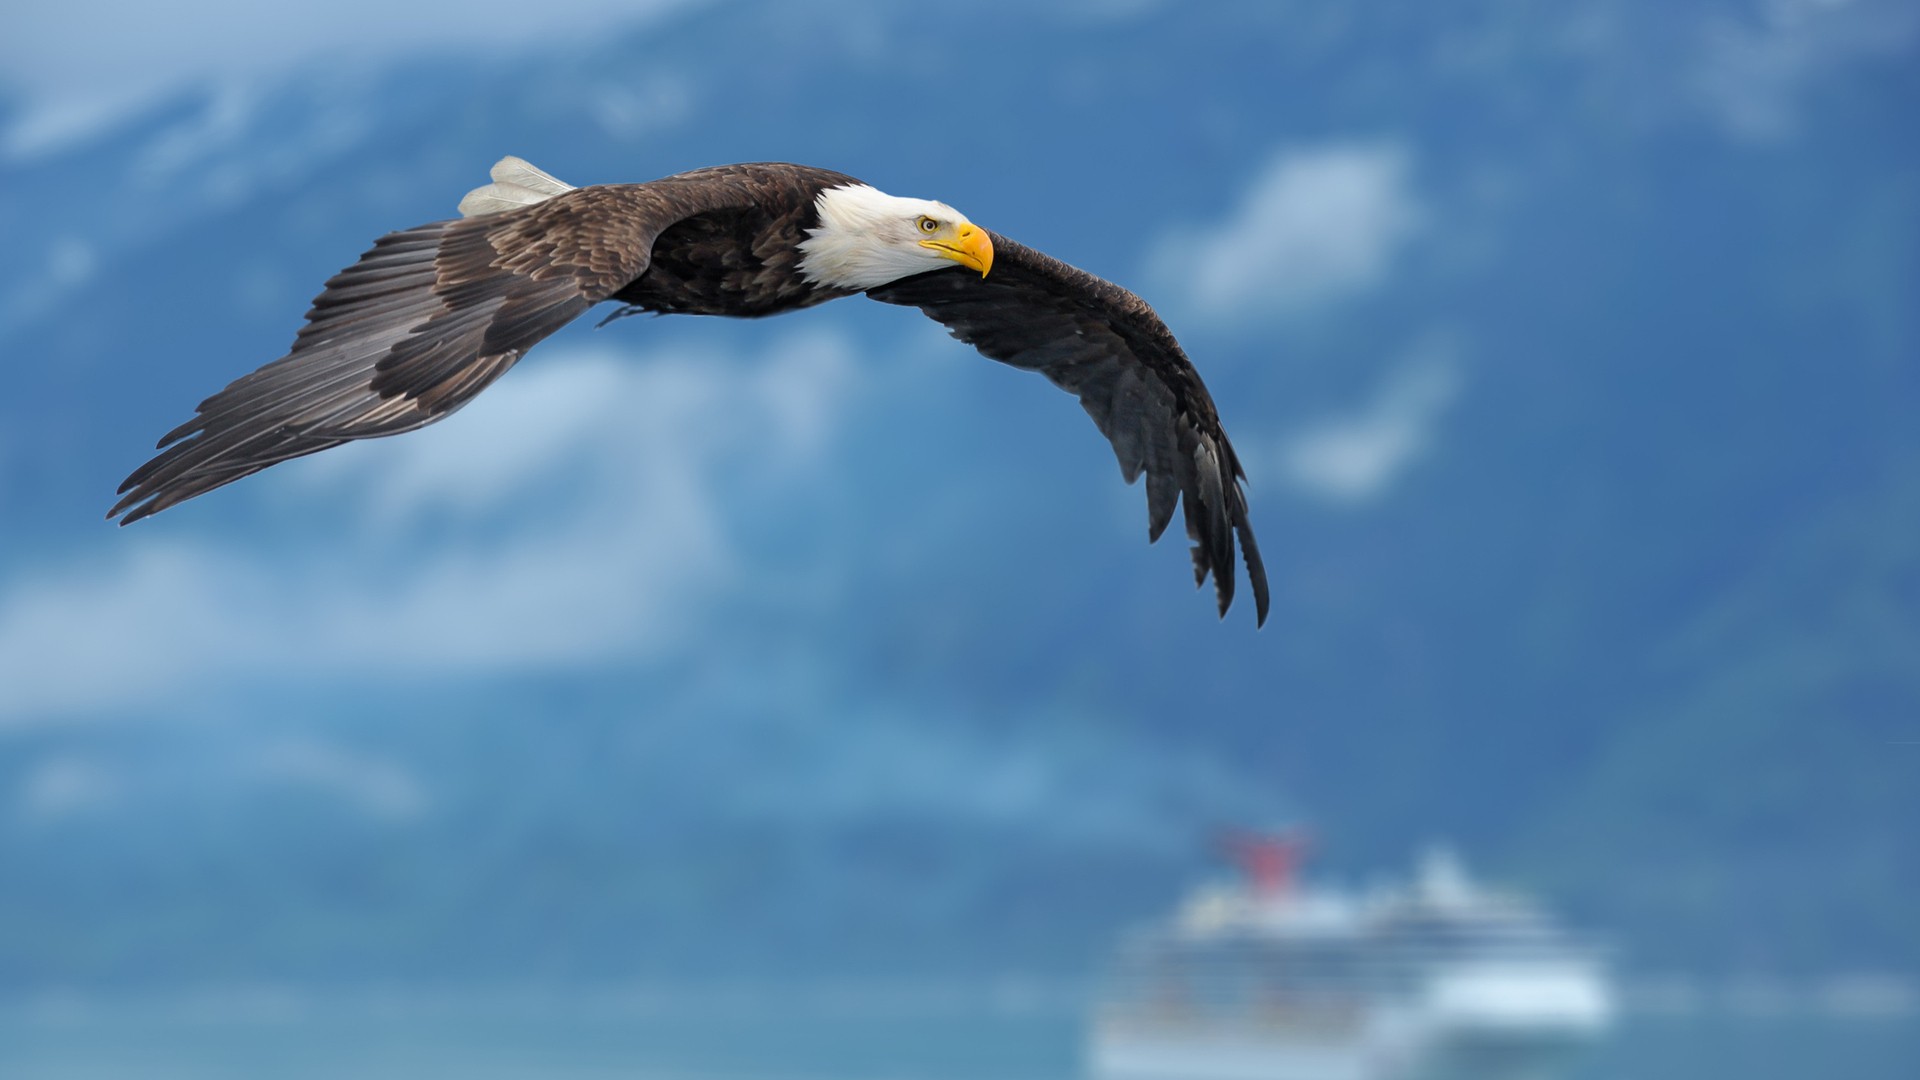 Download Flying Bald Eagle Wallpaper Free Wallpapers